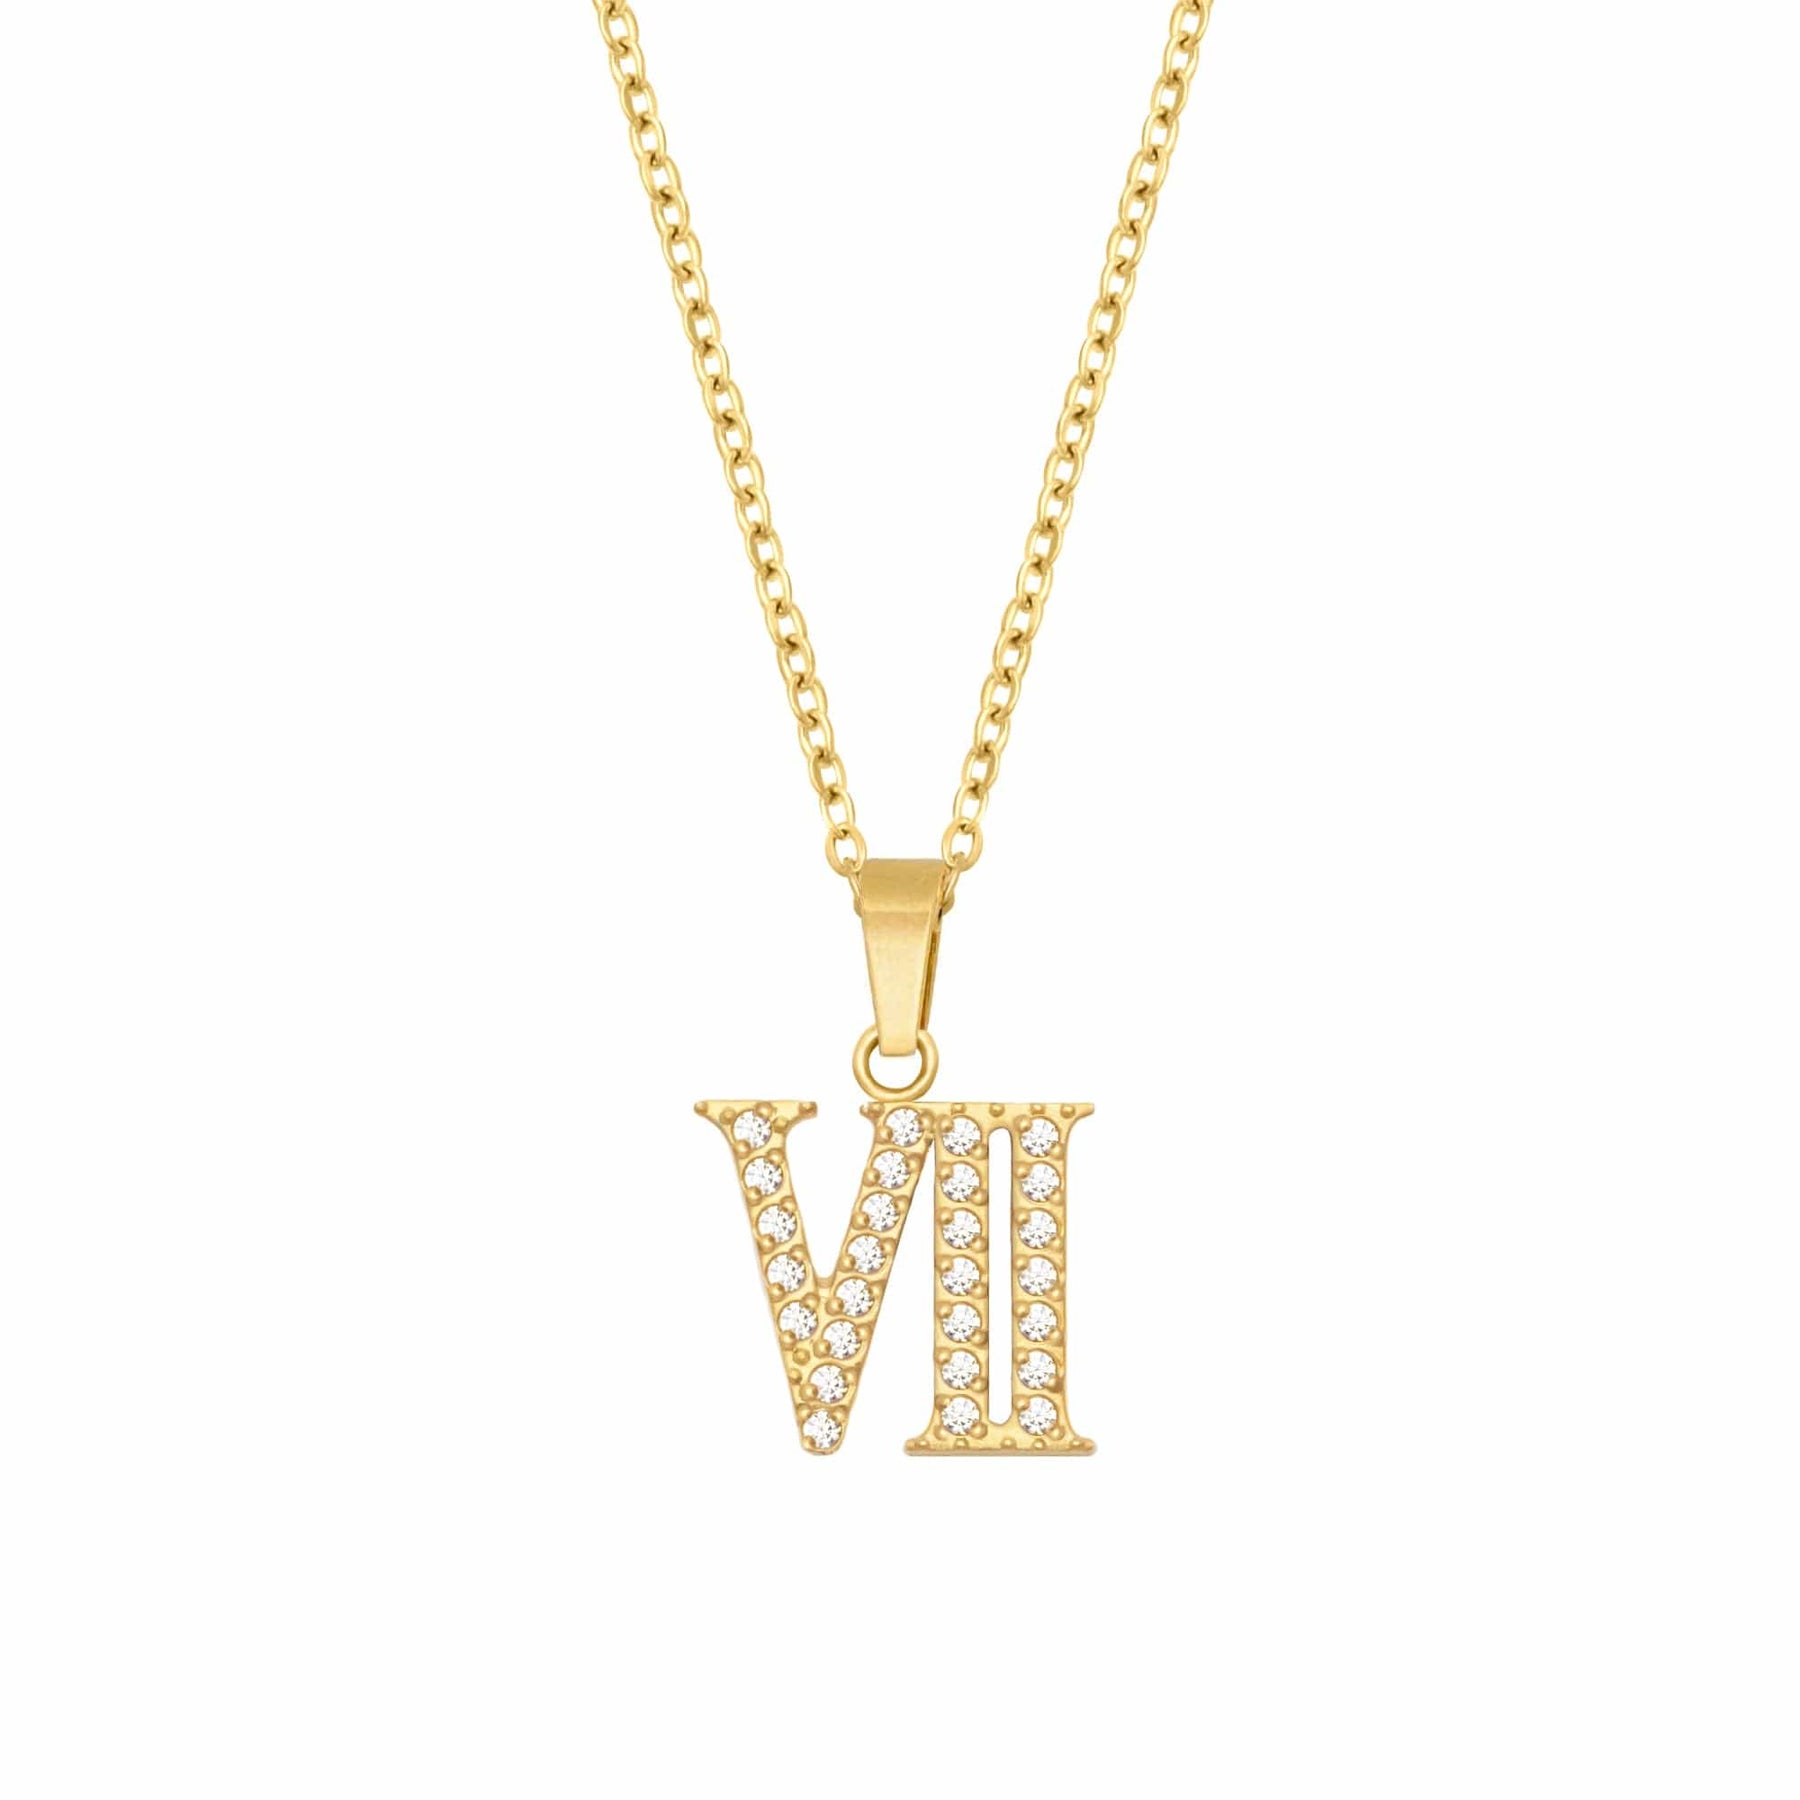 BohoMoon Stainless Steel Roman Numerals Necklace Gold / VII